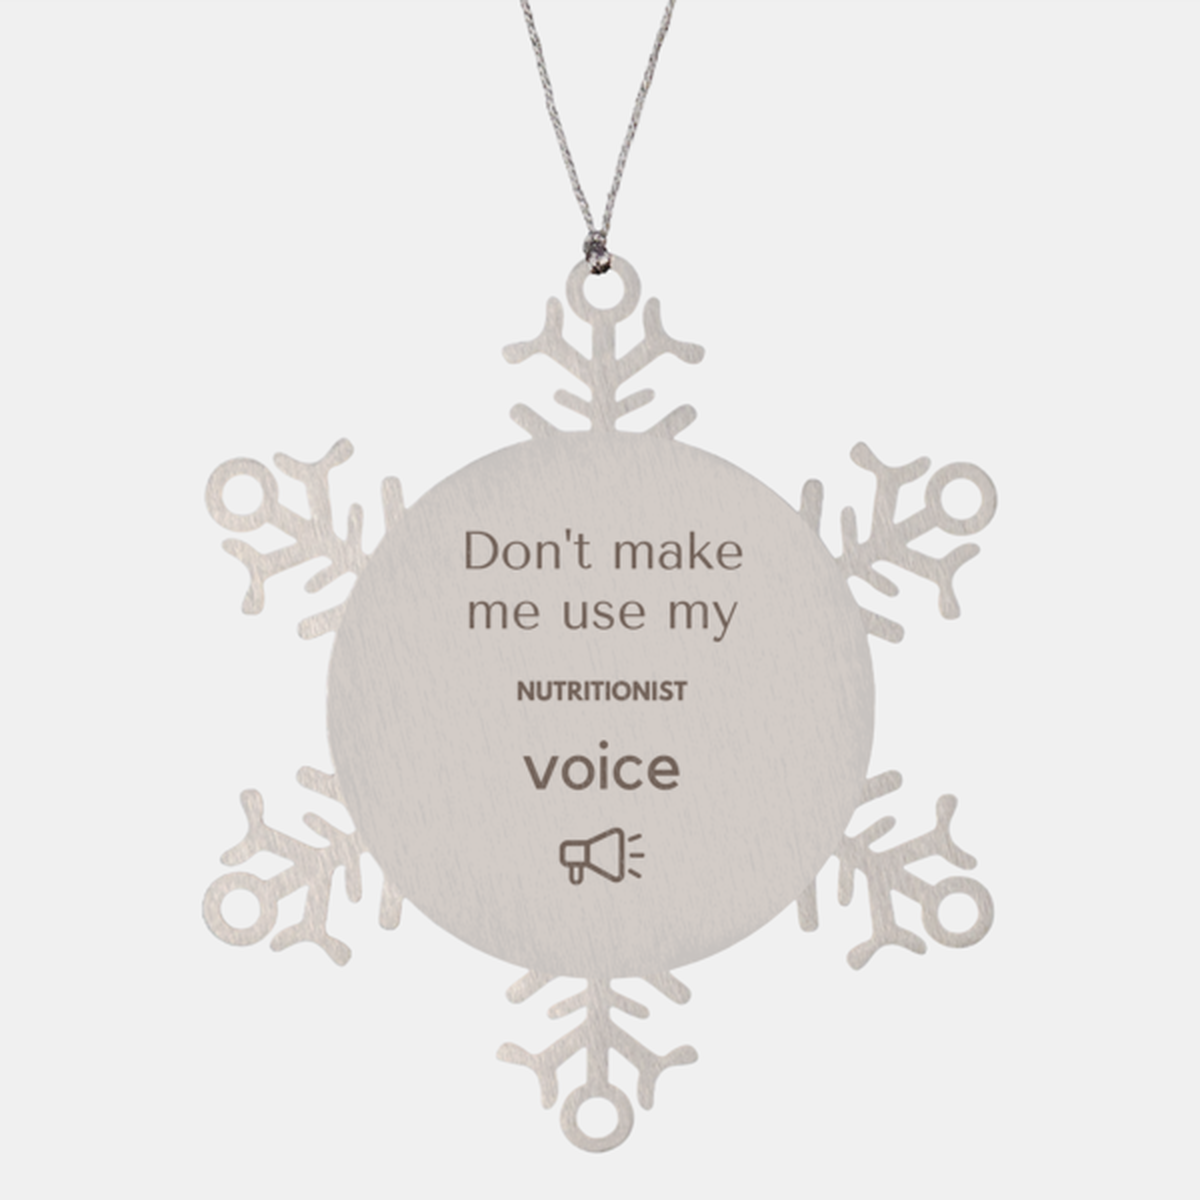 Don't make me use my Nutritionist voice, Sarcasm Nutritionist Ornament Gifts, Christmas Nutritionist Snowflake Ornament Unique Gifts For Nutritionist Coworkers, Men, Women, Colleague, Friends